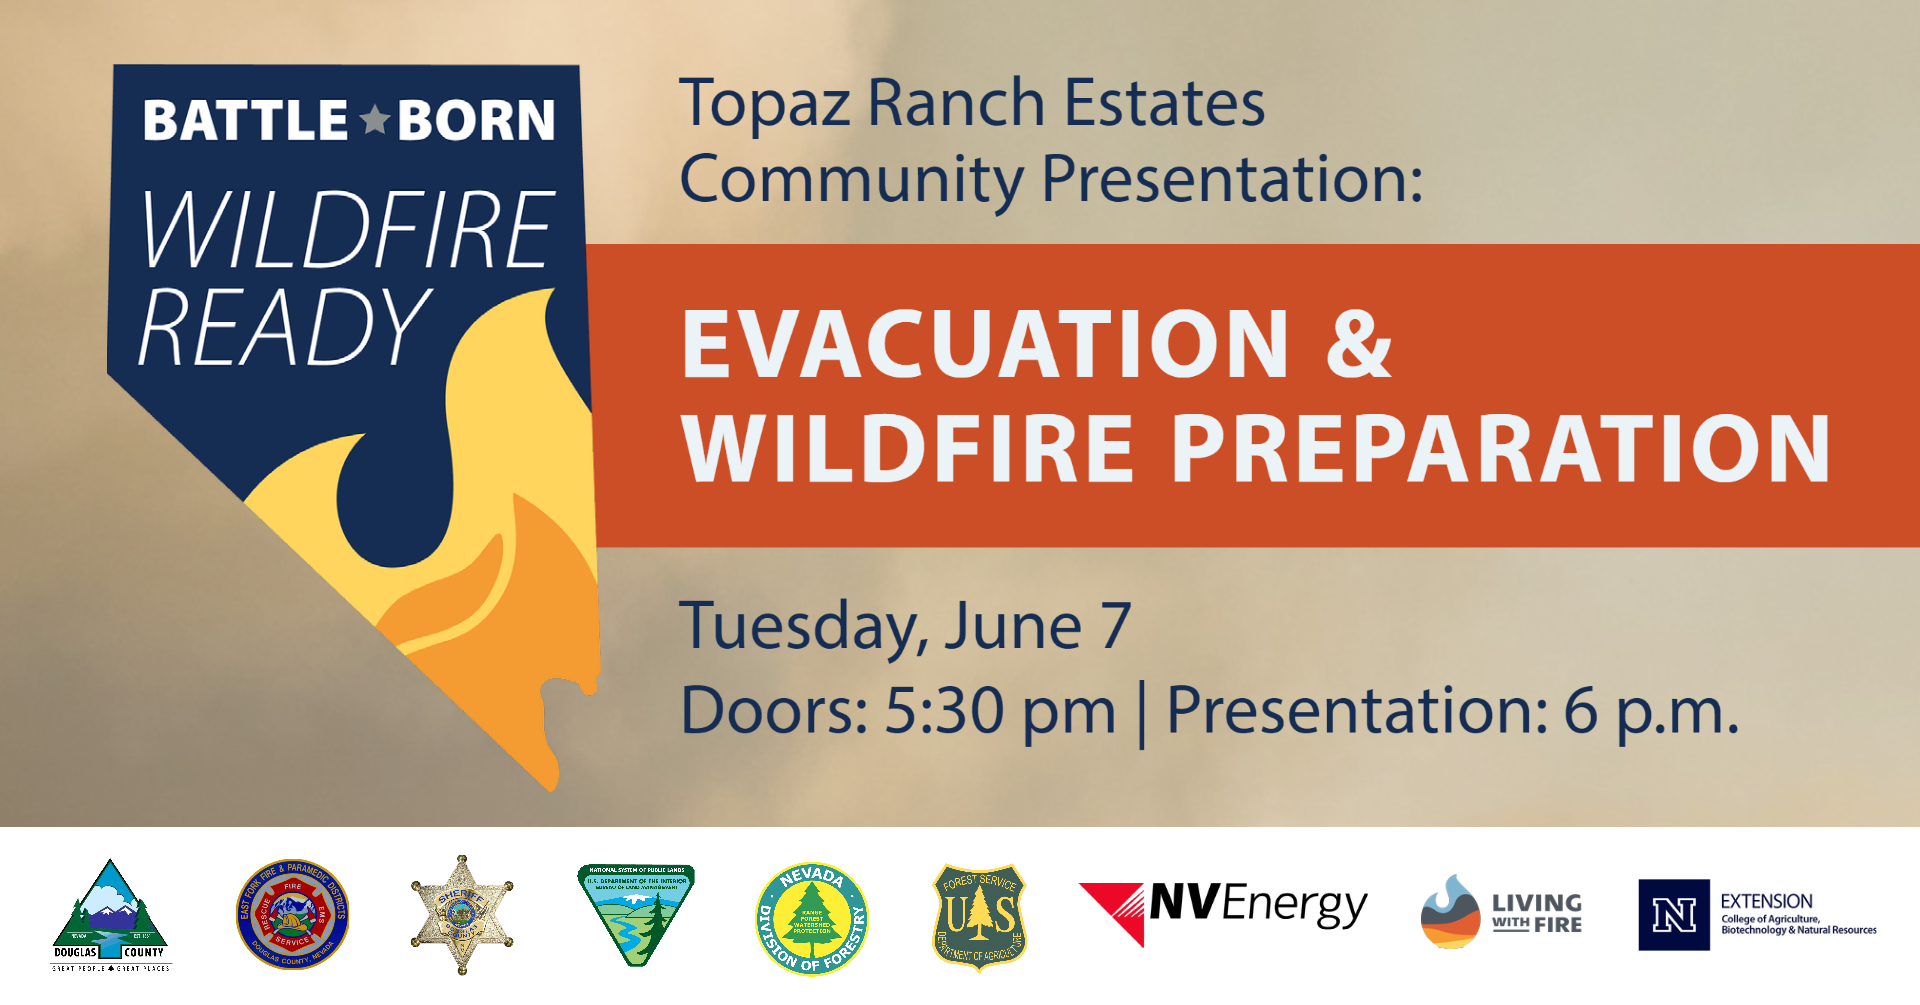 On the left is an icon in the shape on Nevada with text in side that reads "Topaz Ranch Estates Community Presentation: Wildfire Evacuation and WIldfire Preparedness" and logos for the Bureau of Land Management, Nevada Division of Forestry, Nevada Association of Fire Chiefs, NV Energy, Living With Fire and the University of Nevada, Reno Extension